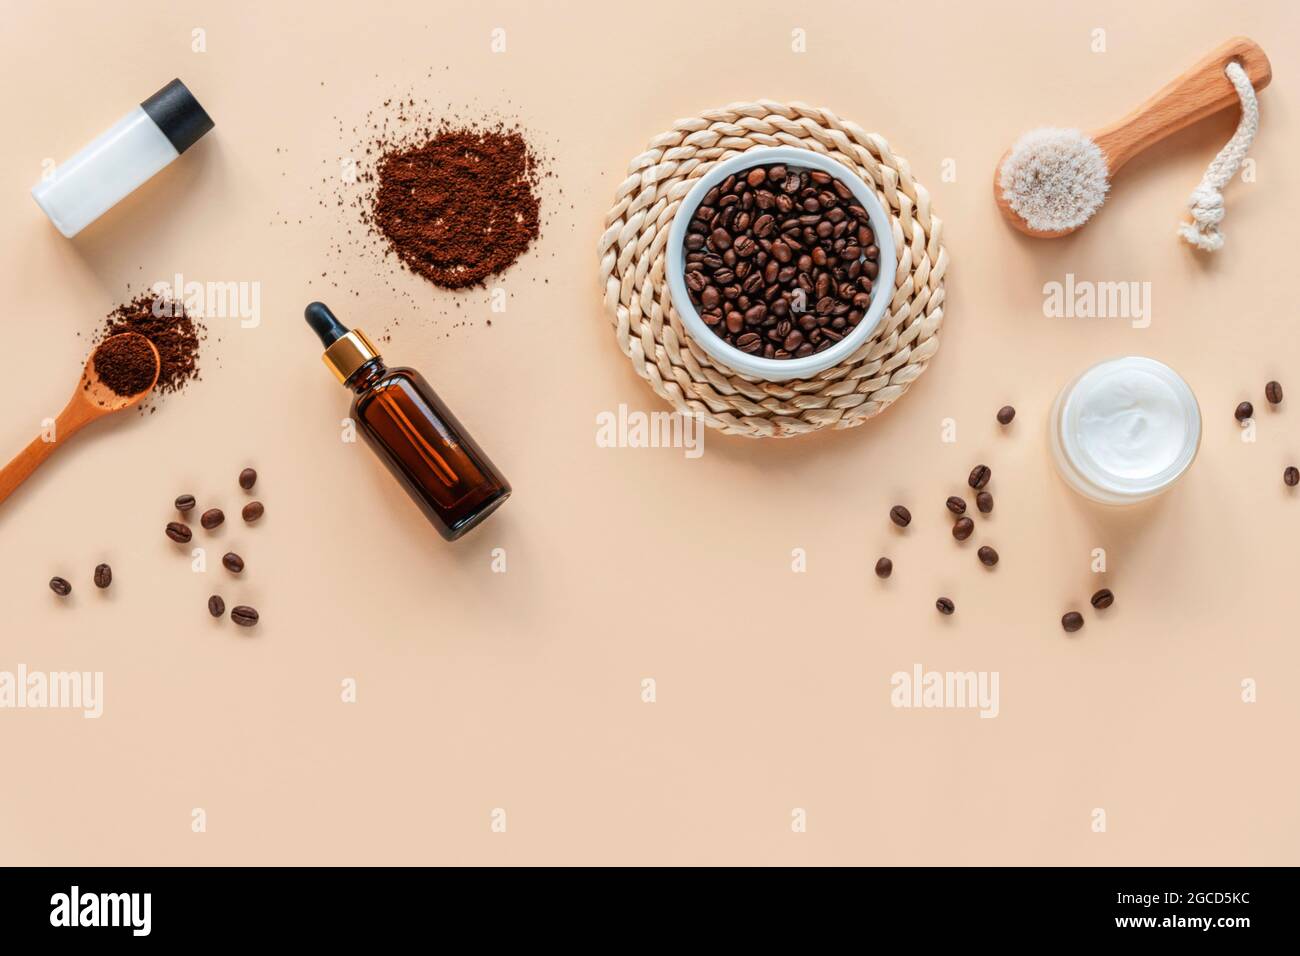 Bath accessories and natural cosmetics, ingredients for coffee scrub, face brush, serum bottle on beige background with copy space. Top view, flat lay Stock Photo